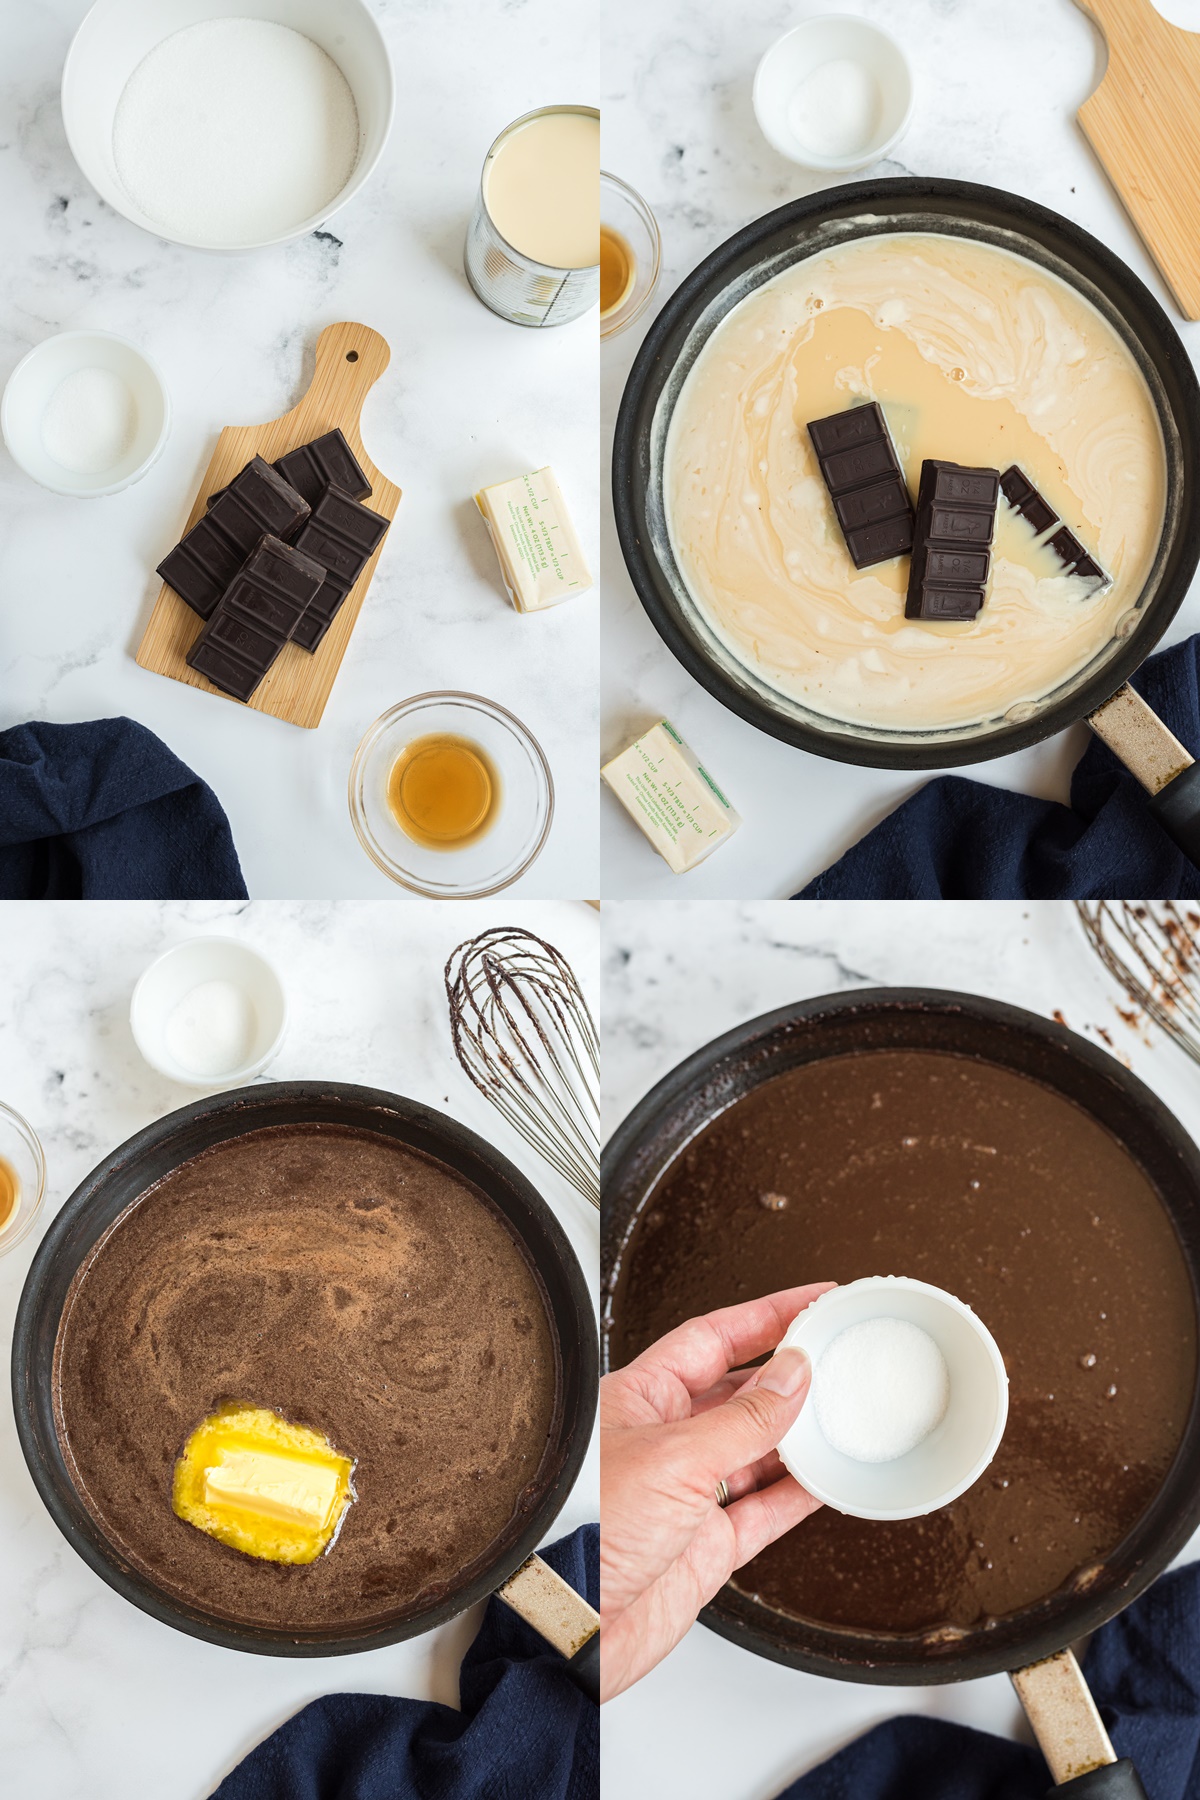 Process of making a hot fudge chocolate sauce. Melting the butter and chocolate, adding salt, whisking it until smooth.